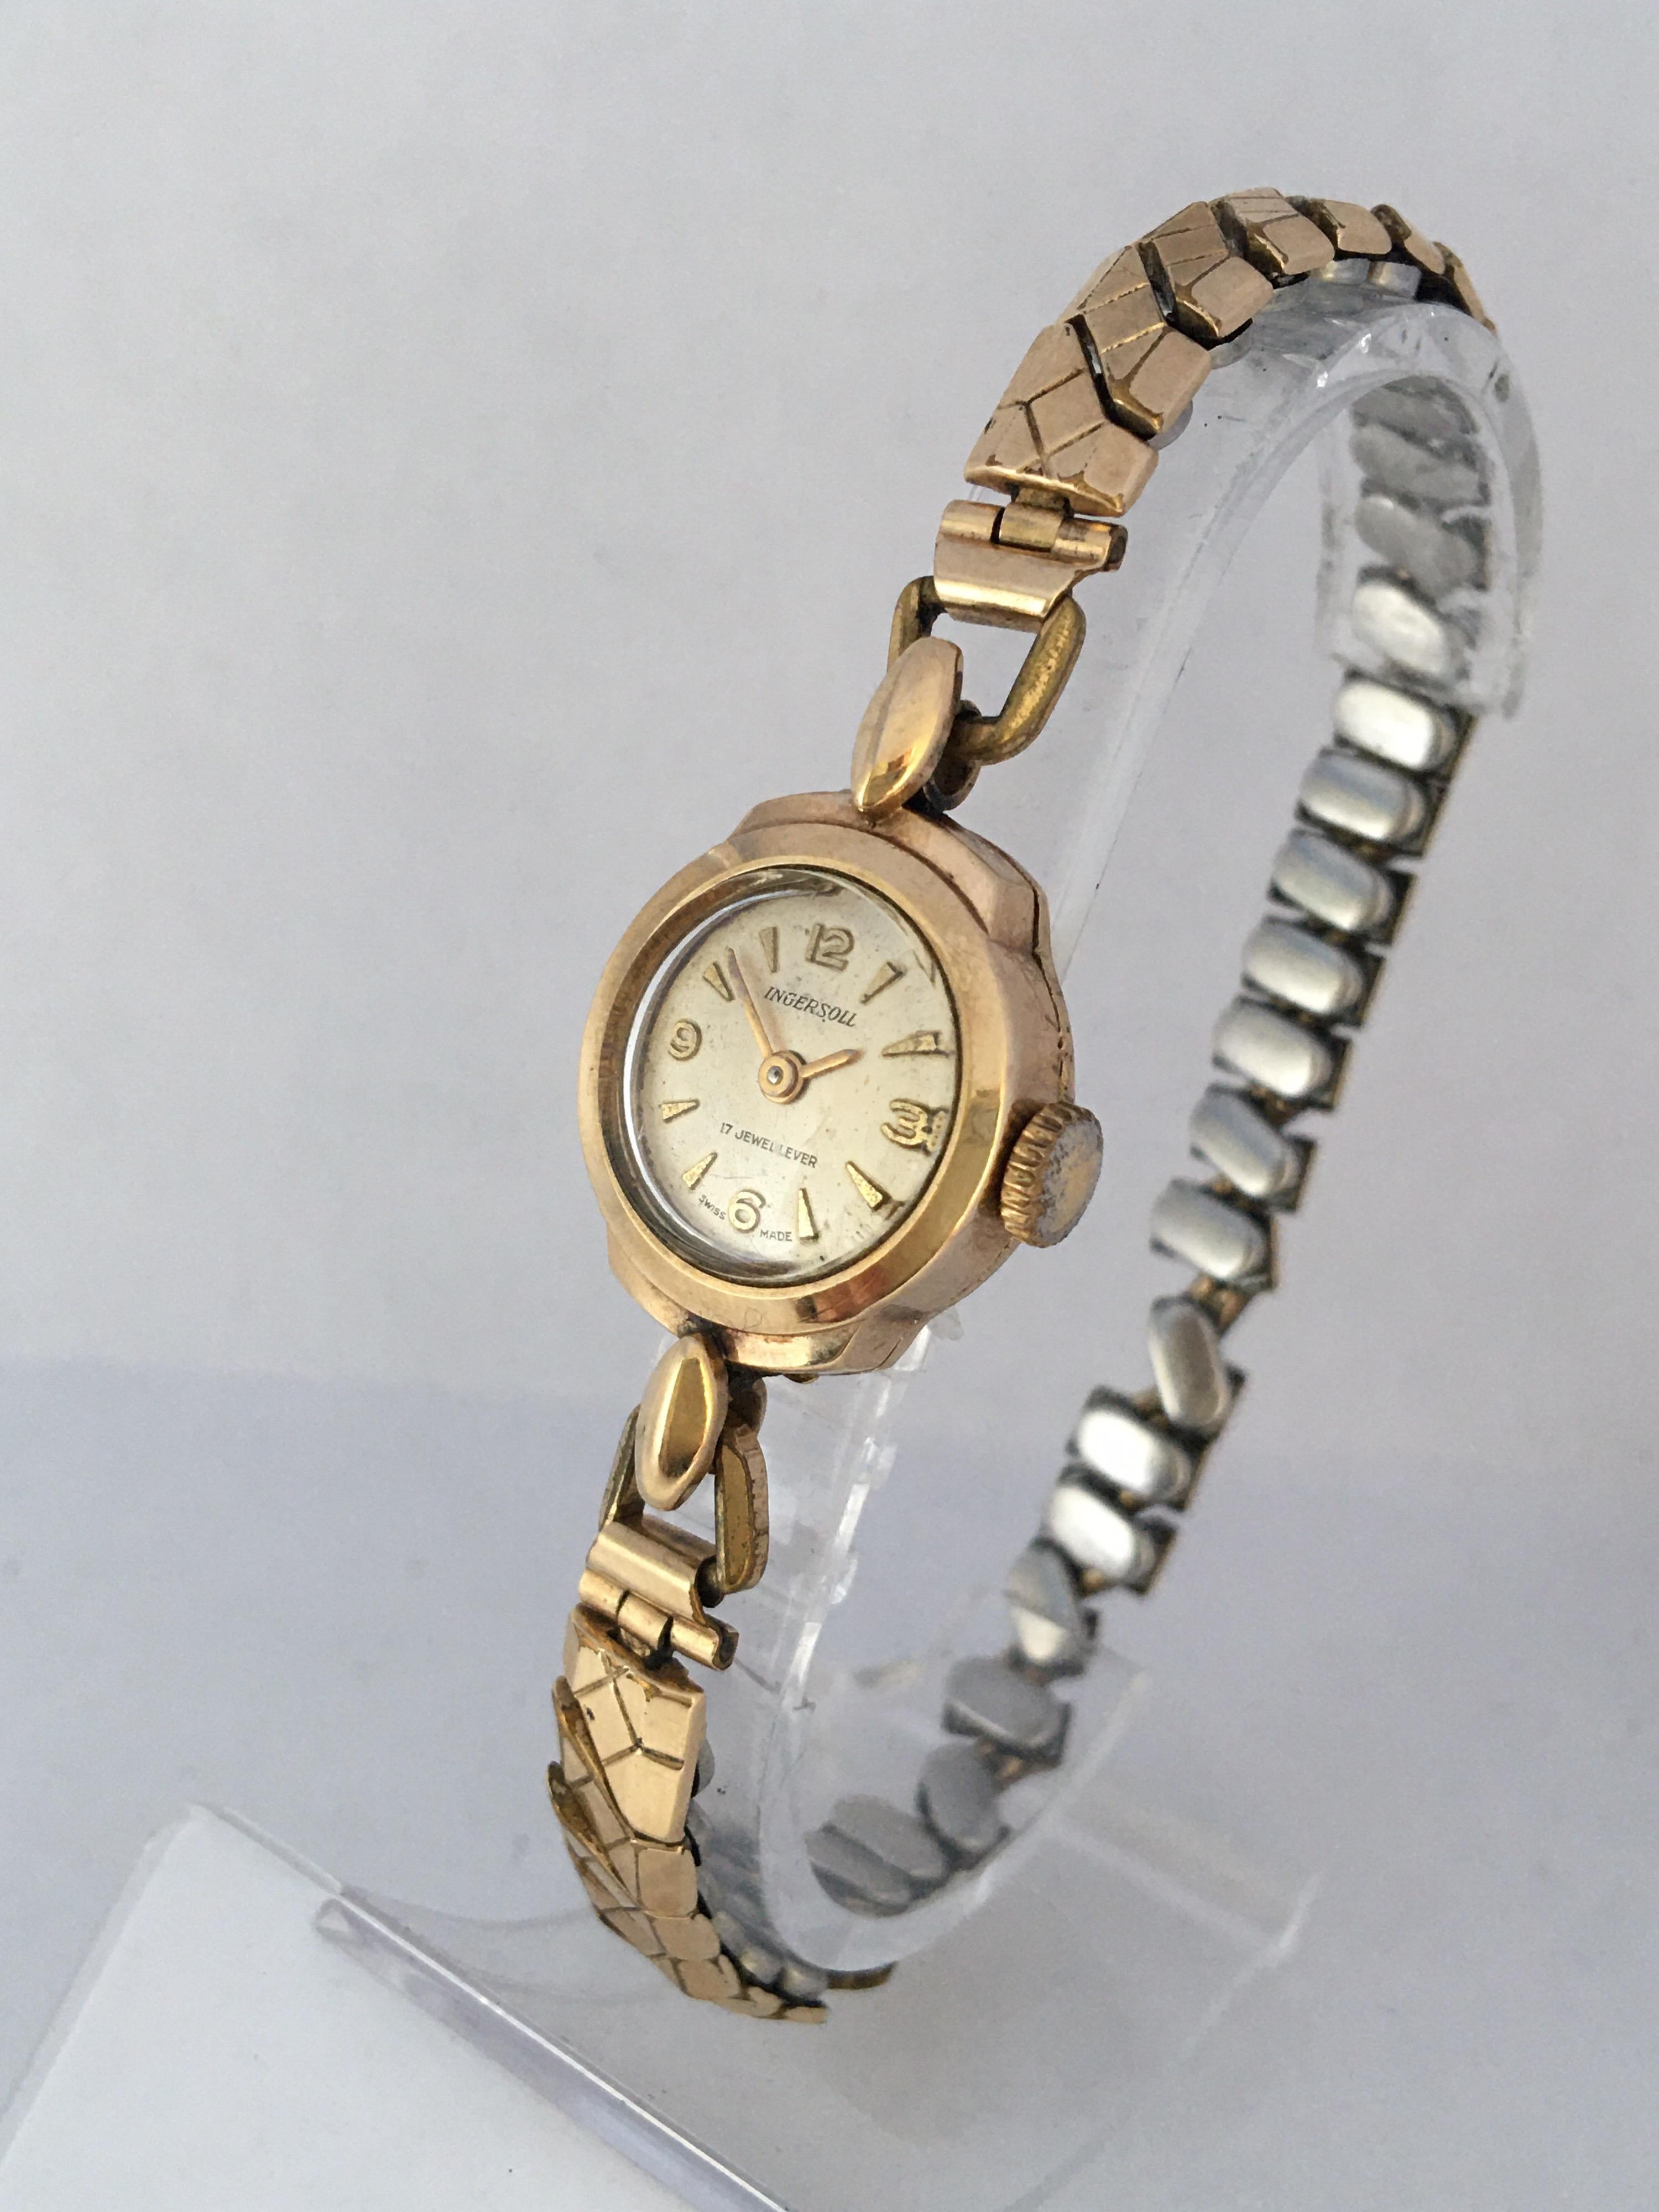 This beautiful pre-owned vintage gold mechanical ladies watch is working and it is ticking well but I cannot guarantee the time accuracy. Visible signs of ageing and wear as shown. 